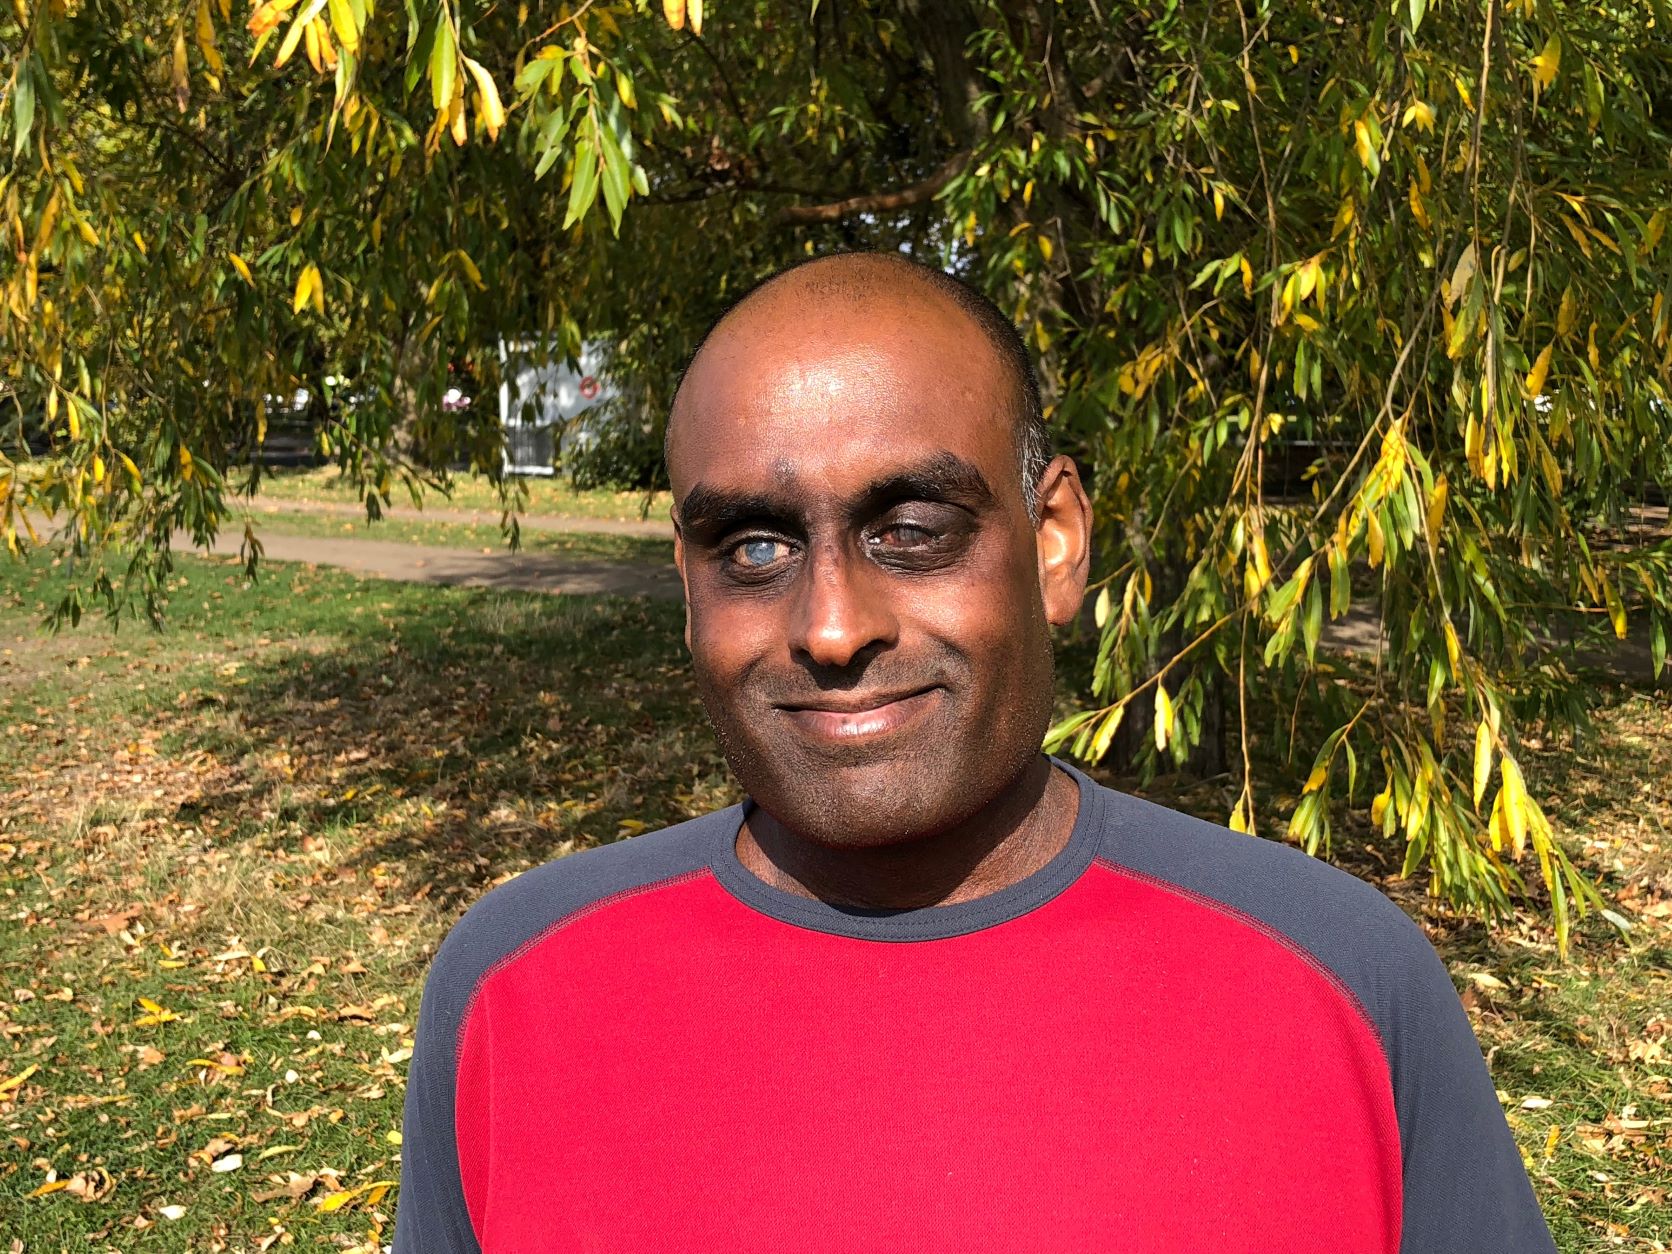 Headshot of London SLC member, Haren Thillainathan. He standing outside under a tree in the sunshine. He is wearing a red and navy t-shirt.